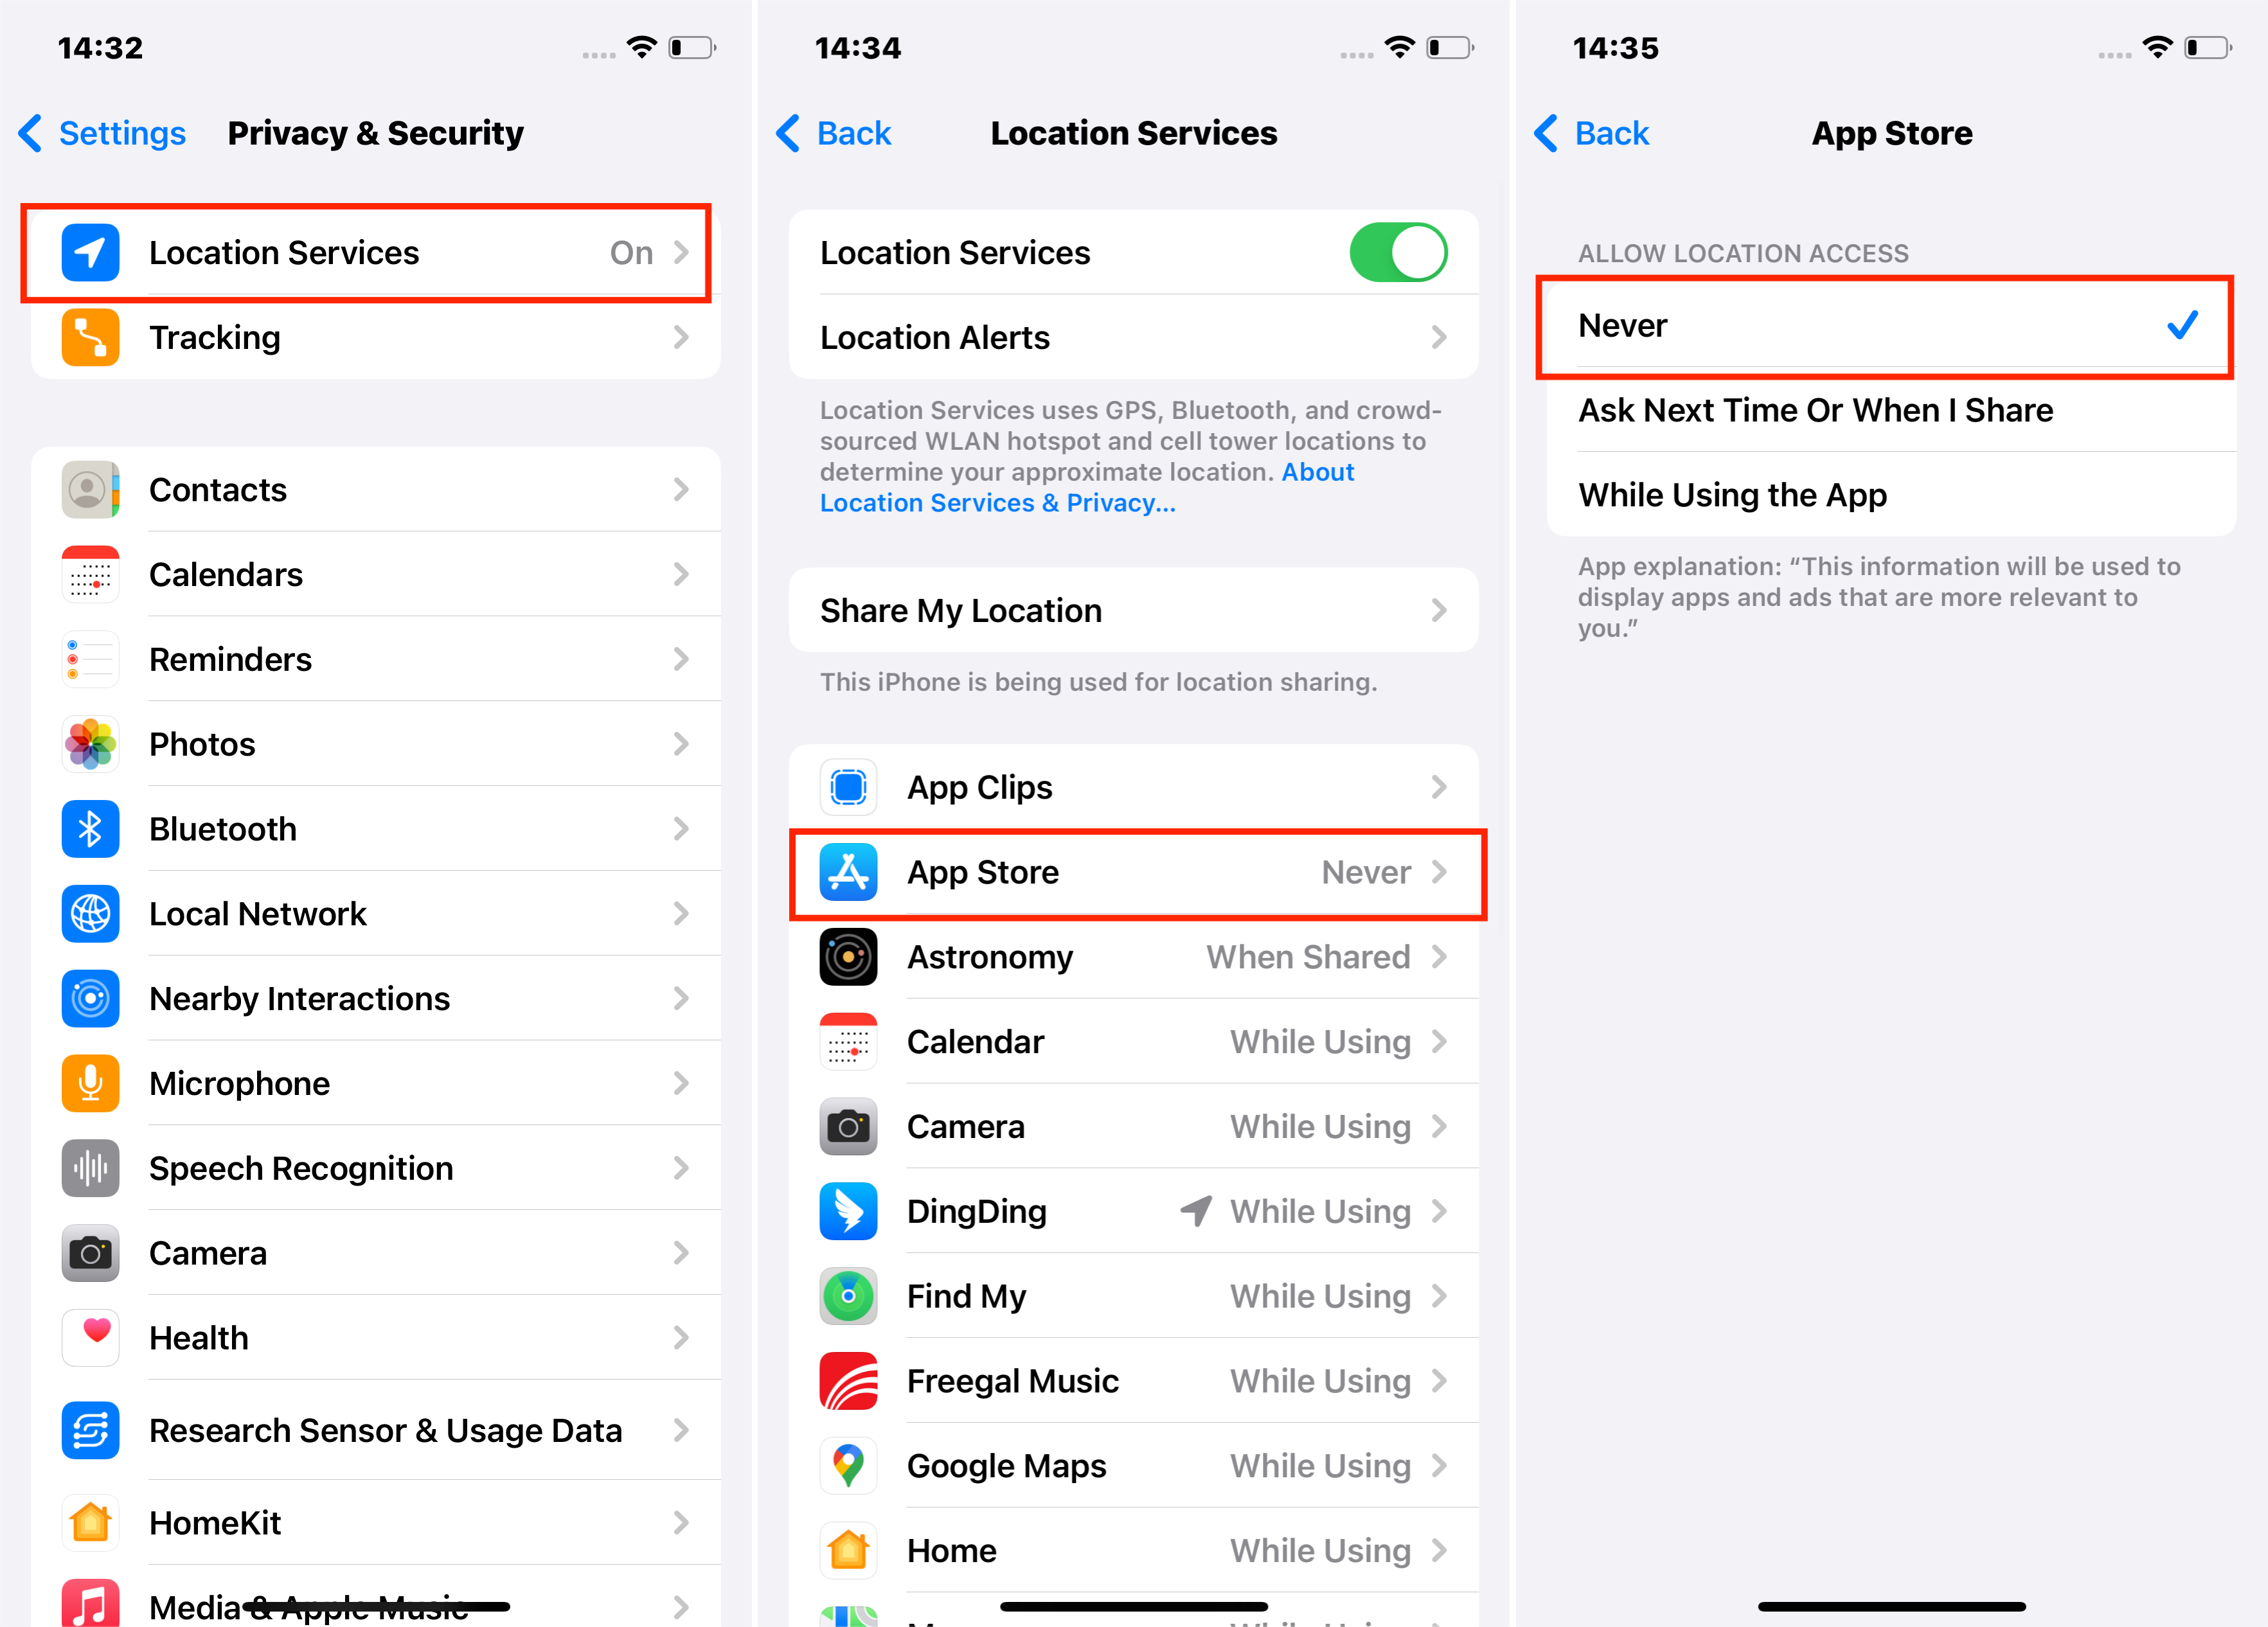 Steps to Turn off Location Services for a Specific App on iPhone